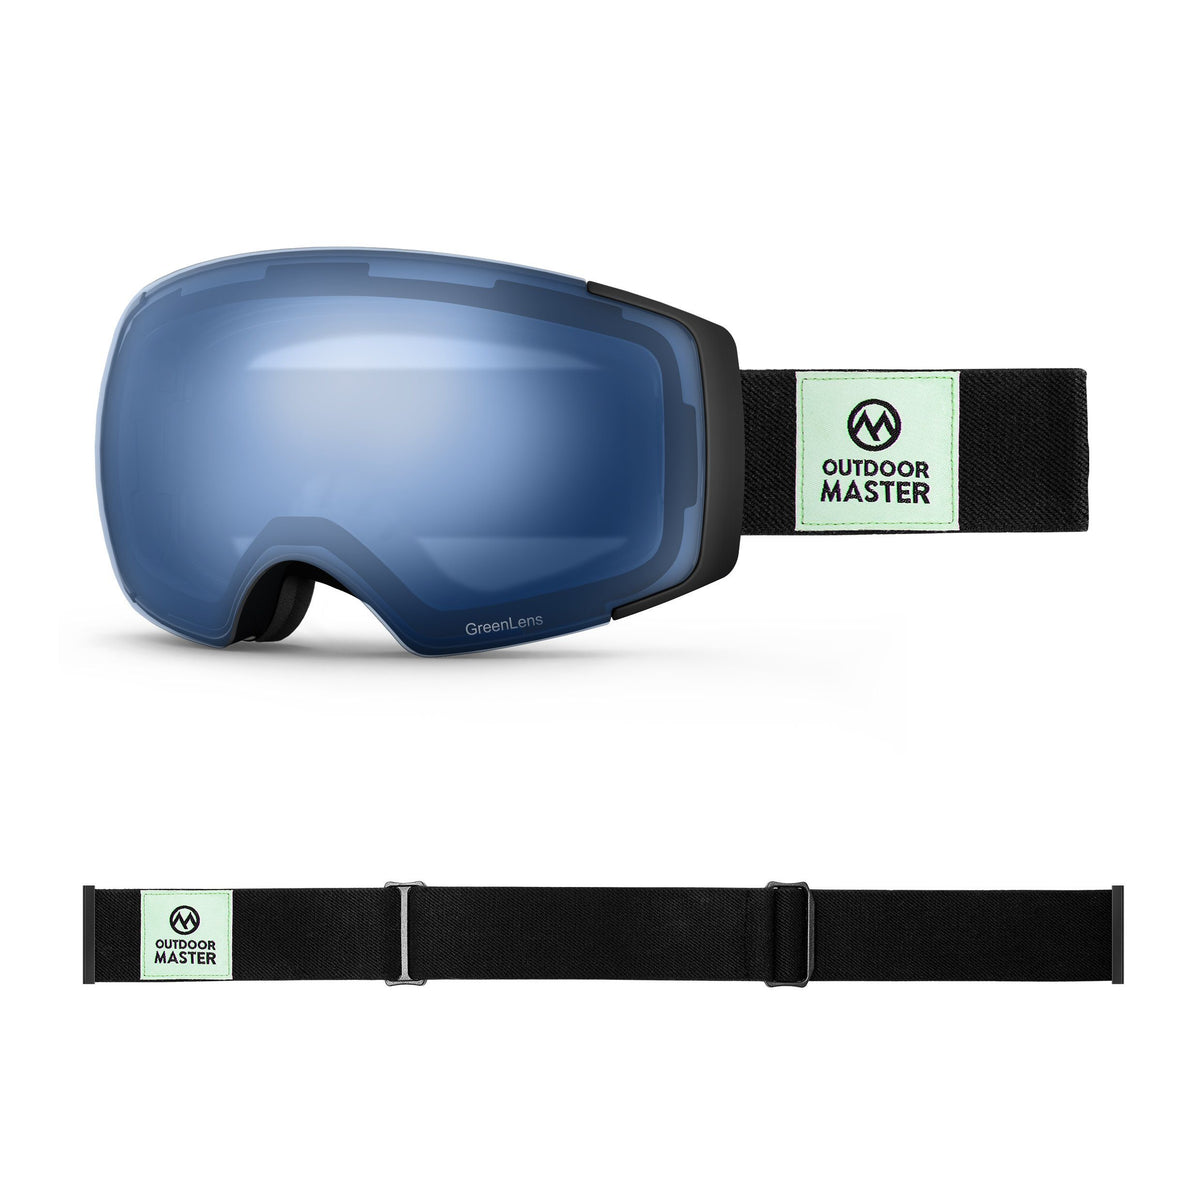 Eco-friendly Ski Goggles Pro Series - The Disappearing Places/Classic BambooStraps Limited Edition OutdoorMaster GreenLens VLT 60% TAC Blue Polarized Classic BambooStraps